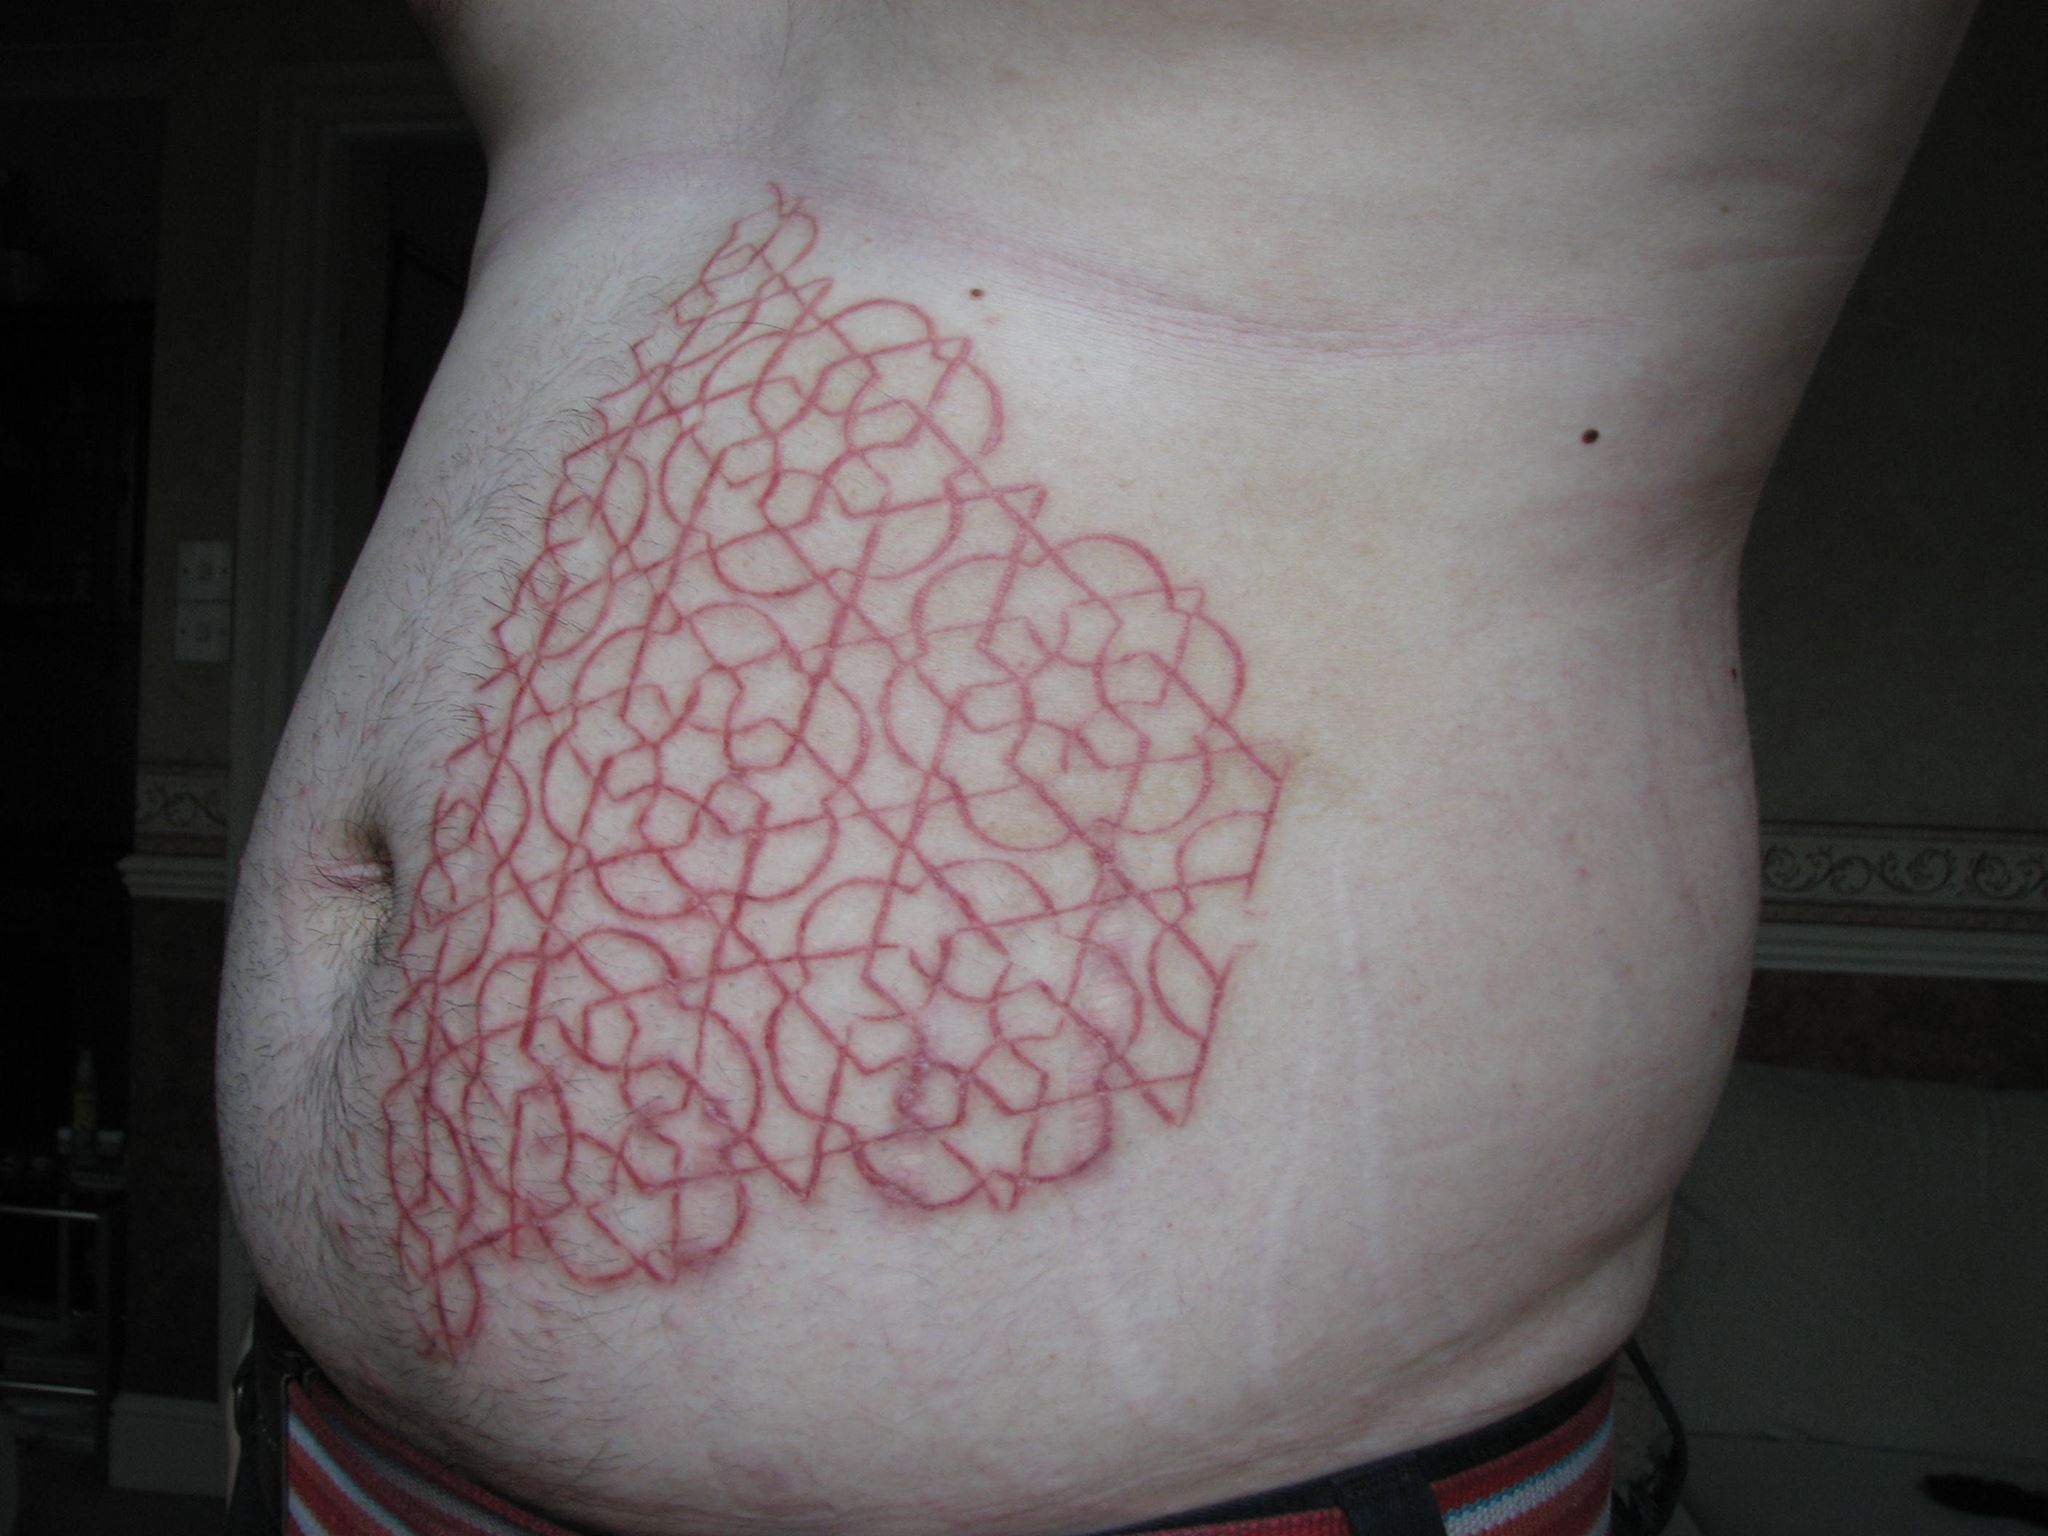 Cool Scarification Design Tattoo On Stomach